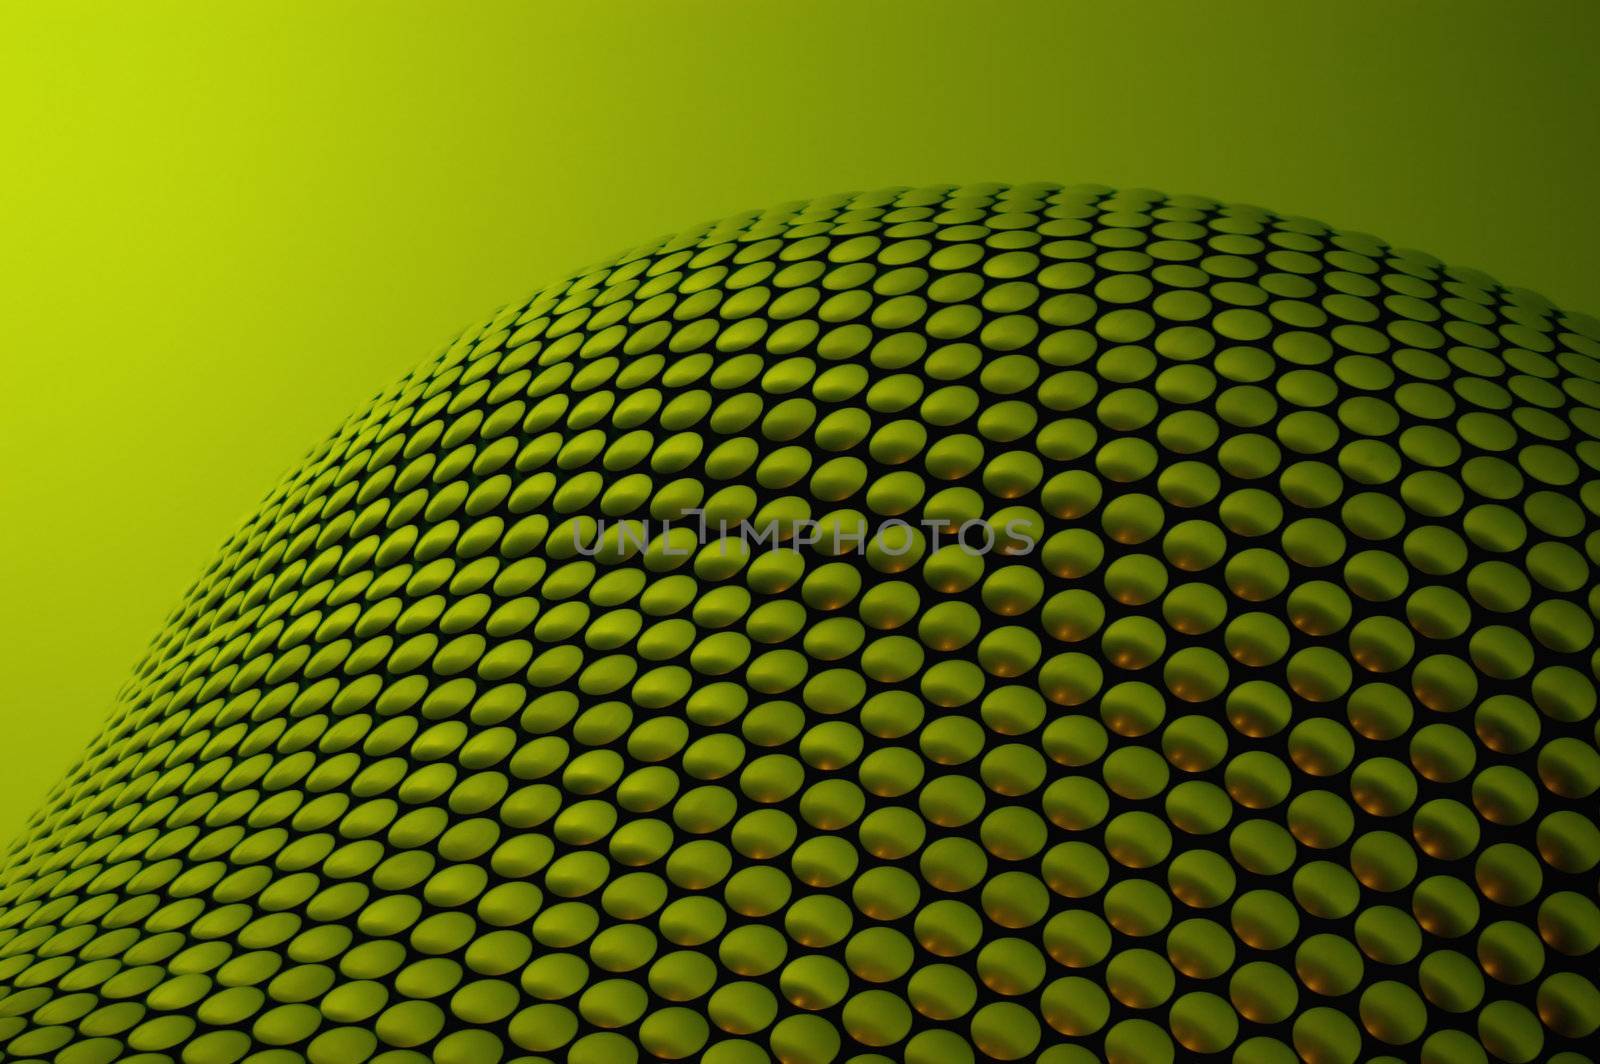 A Colourful Green Reptile looking Abstract Photo